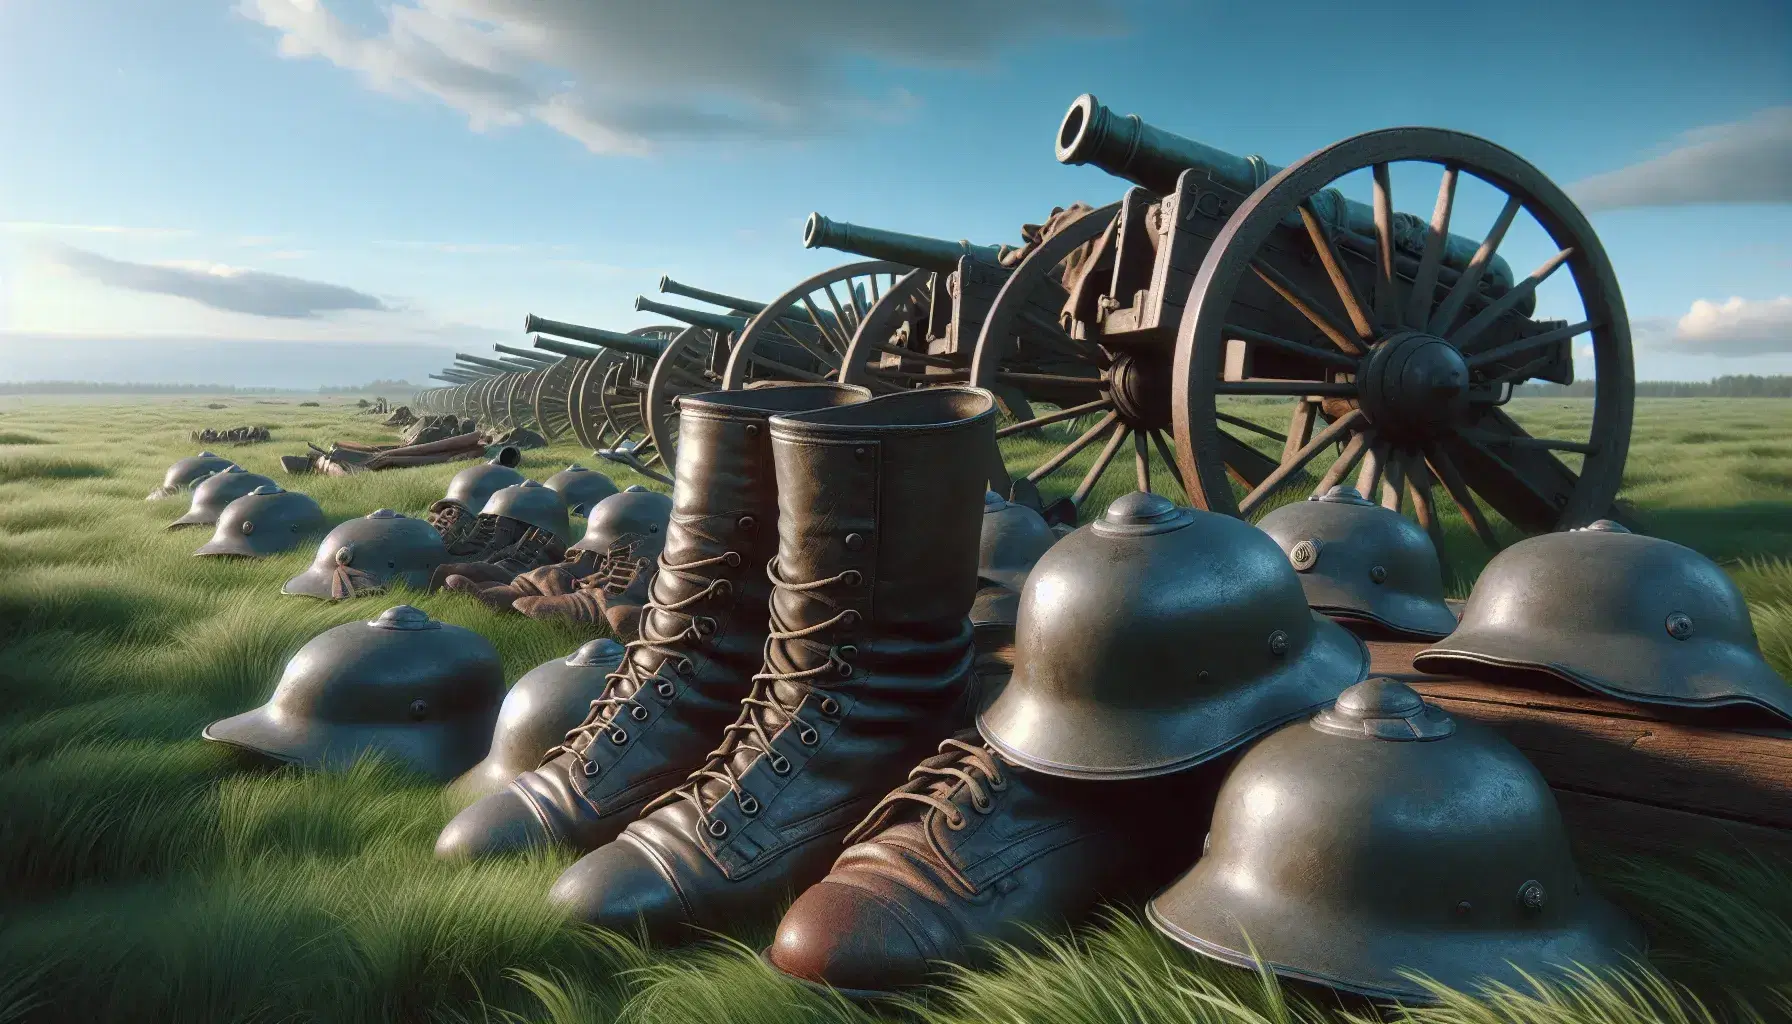 Serene field with scattered early 20th-century military gear, including pickelhaube helmets and weathered boots, alongside a line of vintage cannons.